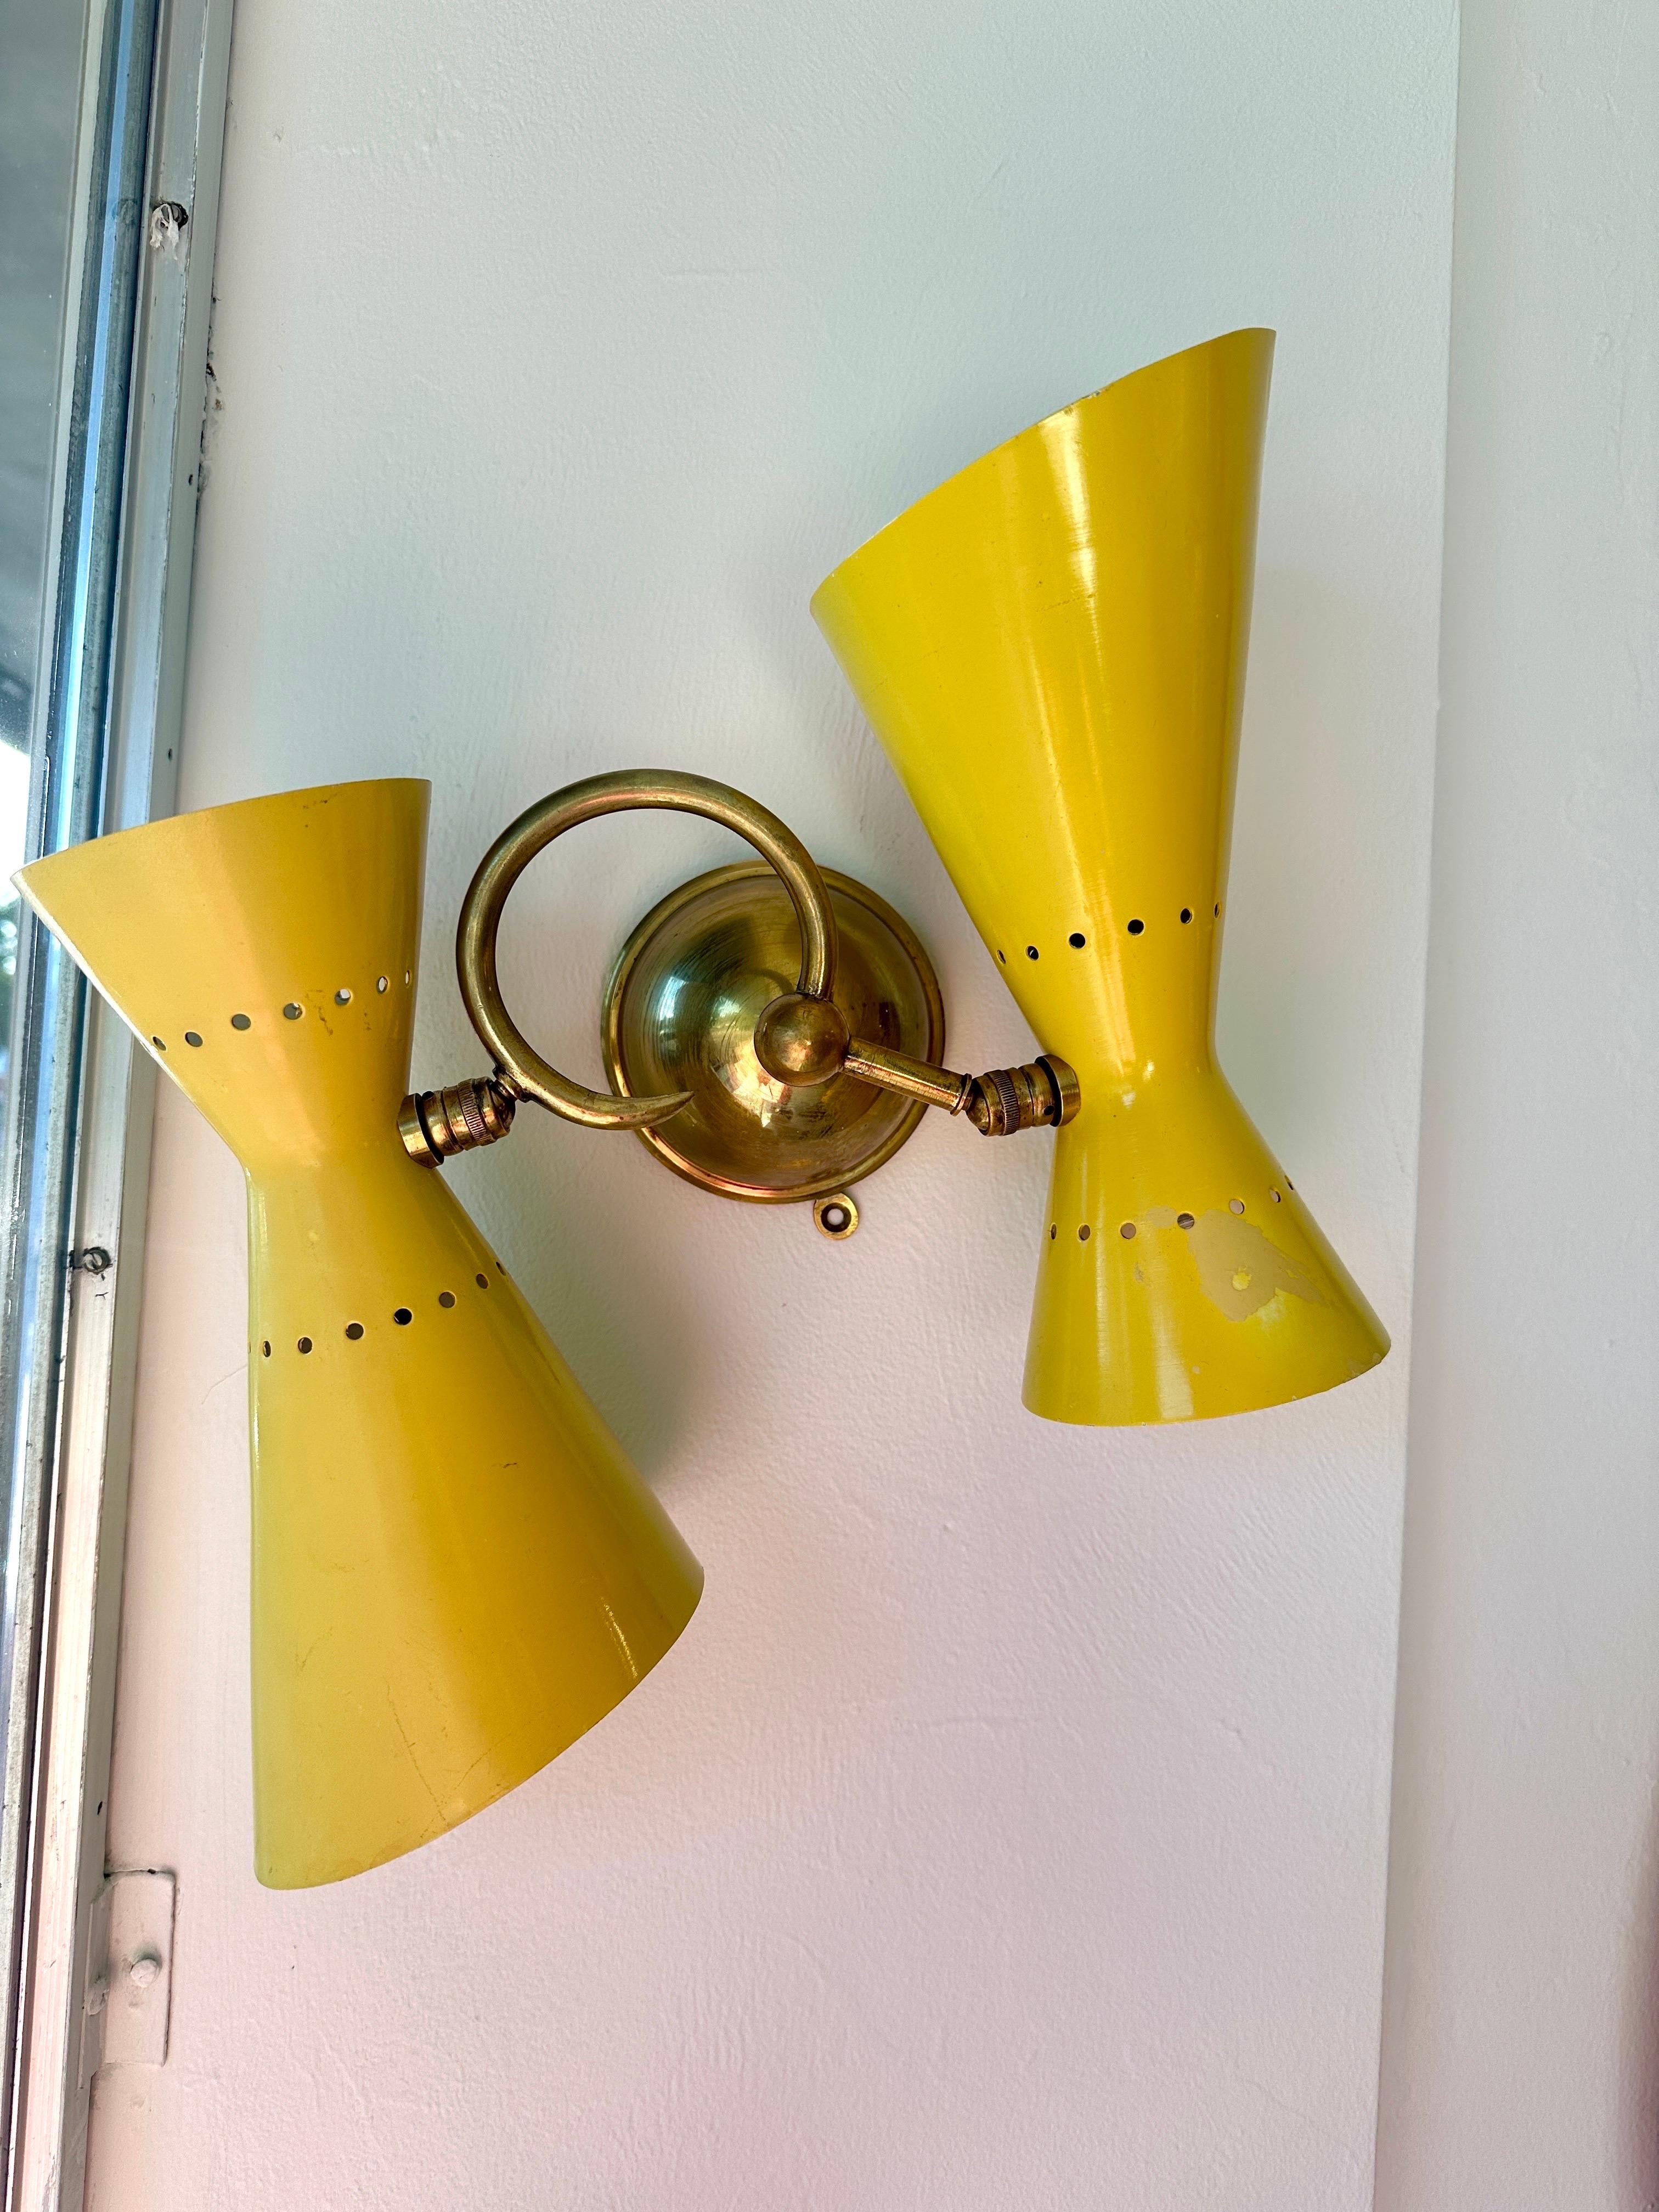 We offer here very FUN Stilnovo vintafe perforated cone wall lights in original vivid yellow. Brass wall mount and curved arms hold these yellow metal cones that are each double lights (up and down) - total of 4 bulbs/ lights per sconce. We have a